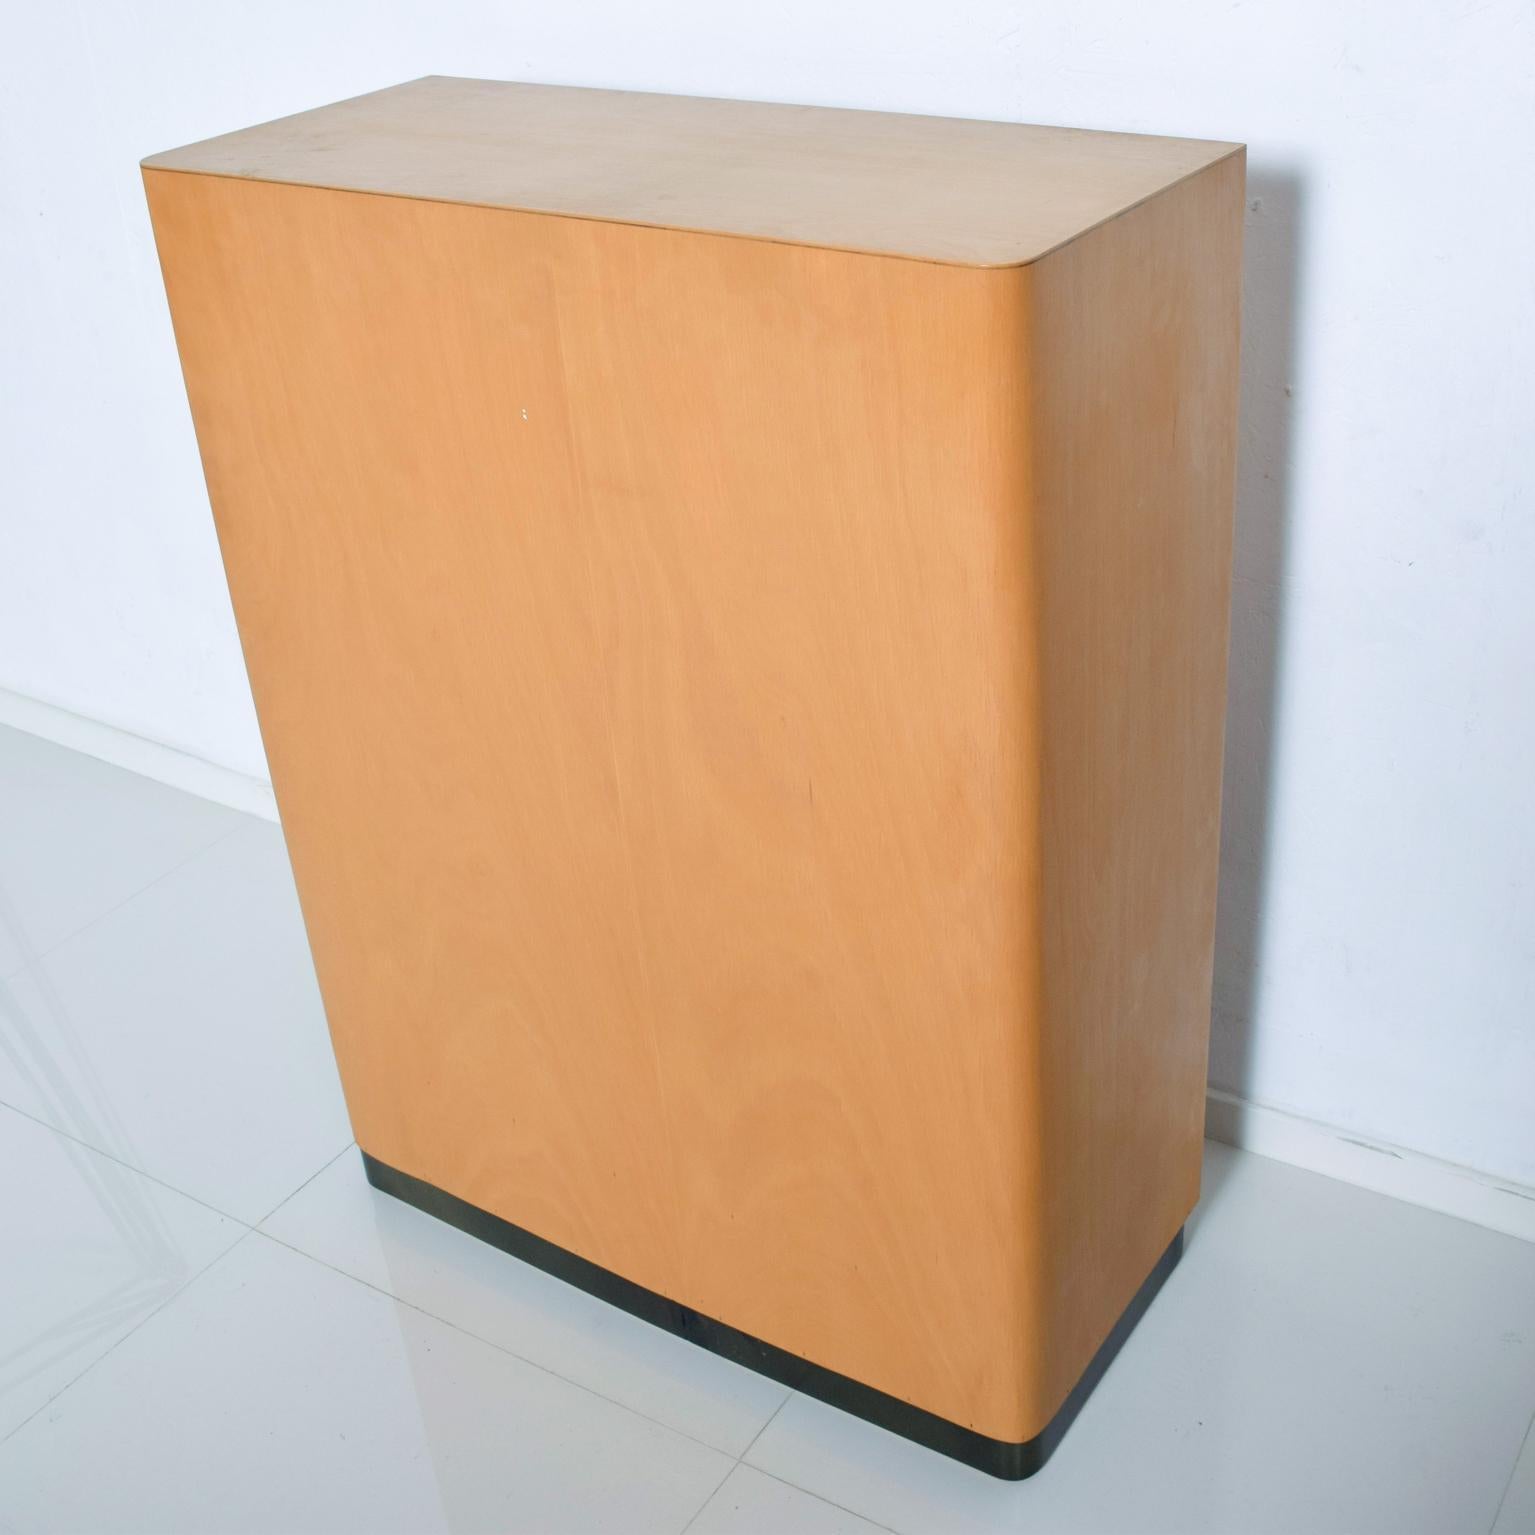 We are pleased to offer: Vintage Möbelfabrik Bauhaus Modern Filing Cabinet by Adolf Maier in Blonde Wood. Comes with Key for locking Tambour Pull up Door. Functions as a Secretary Desk.
Also available a matching blonde Bauhaus kneehole desk by Adolf